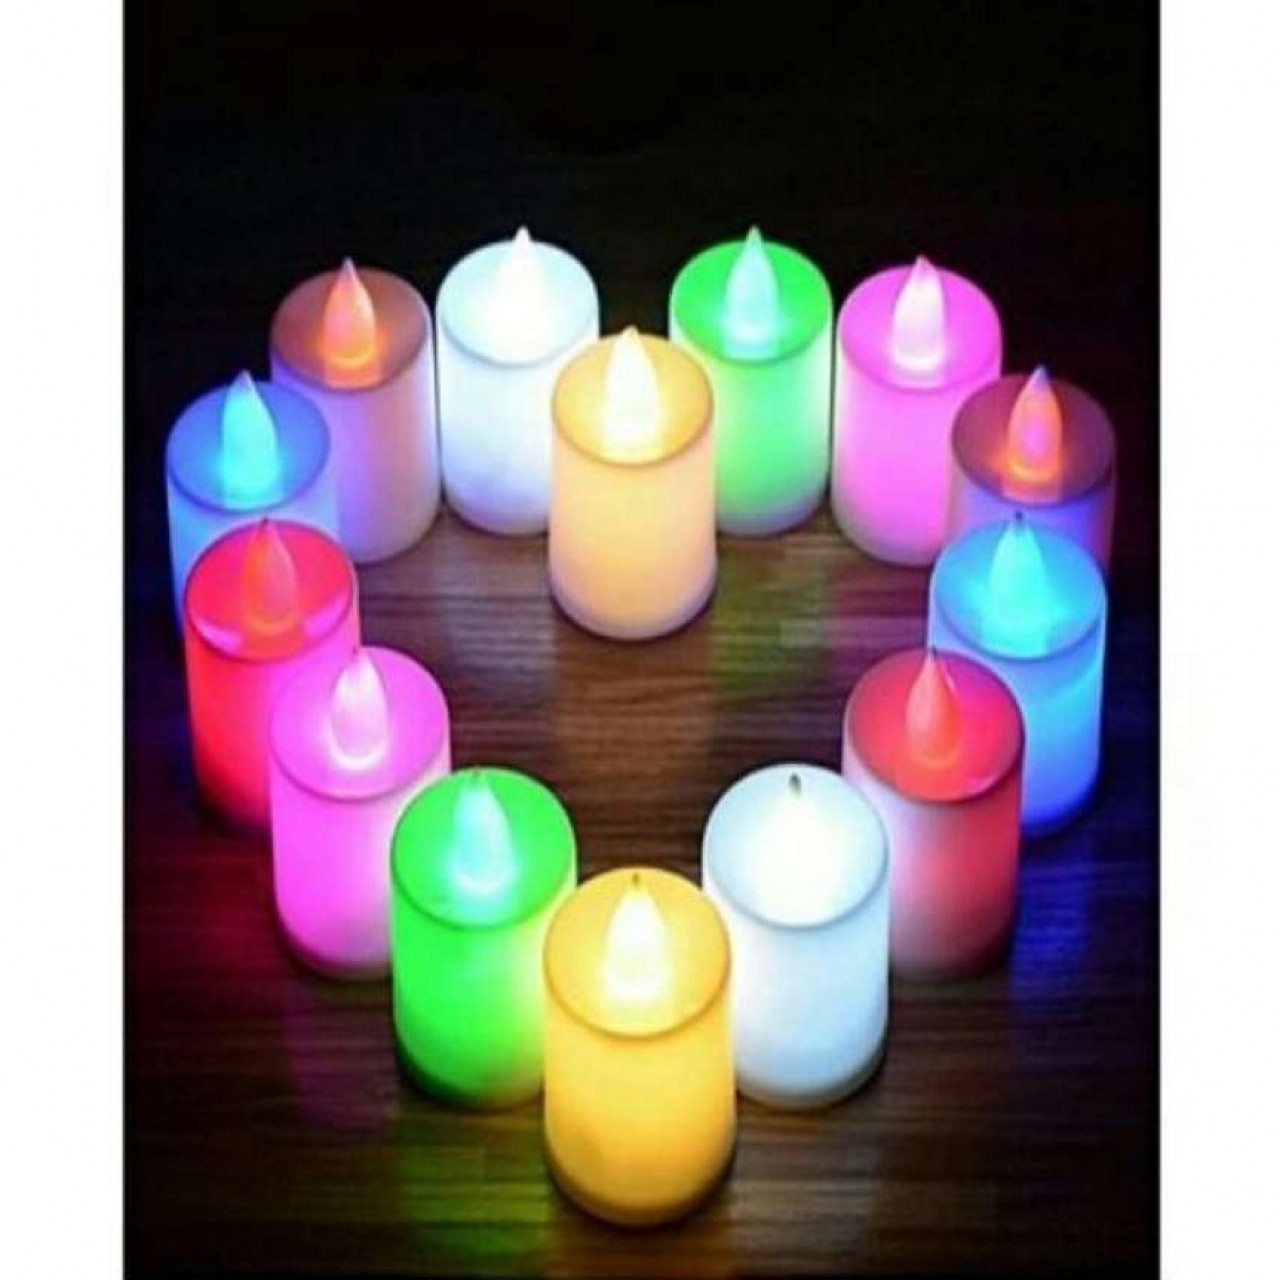 Pack of 5 Led Bulb Lighting Candles